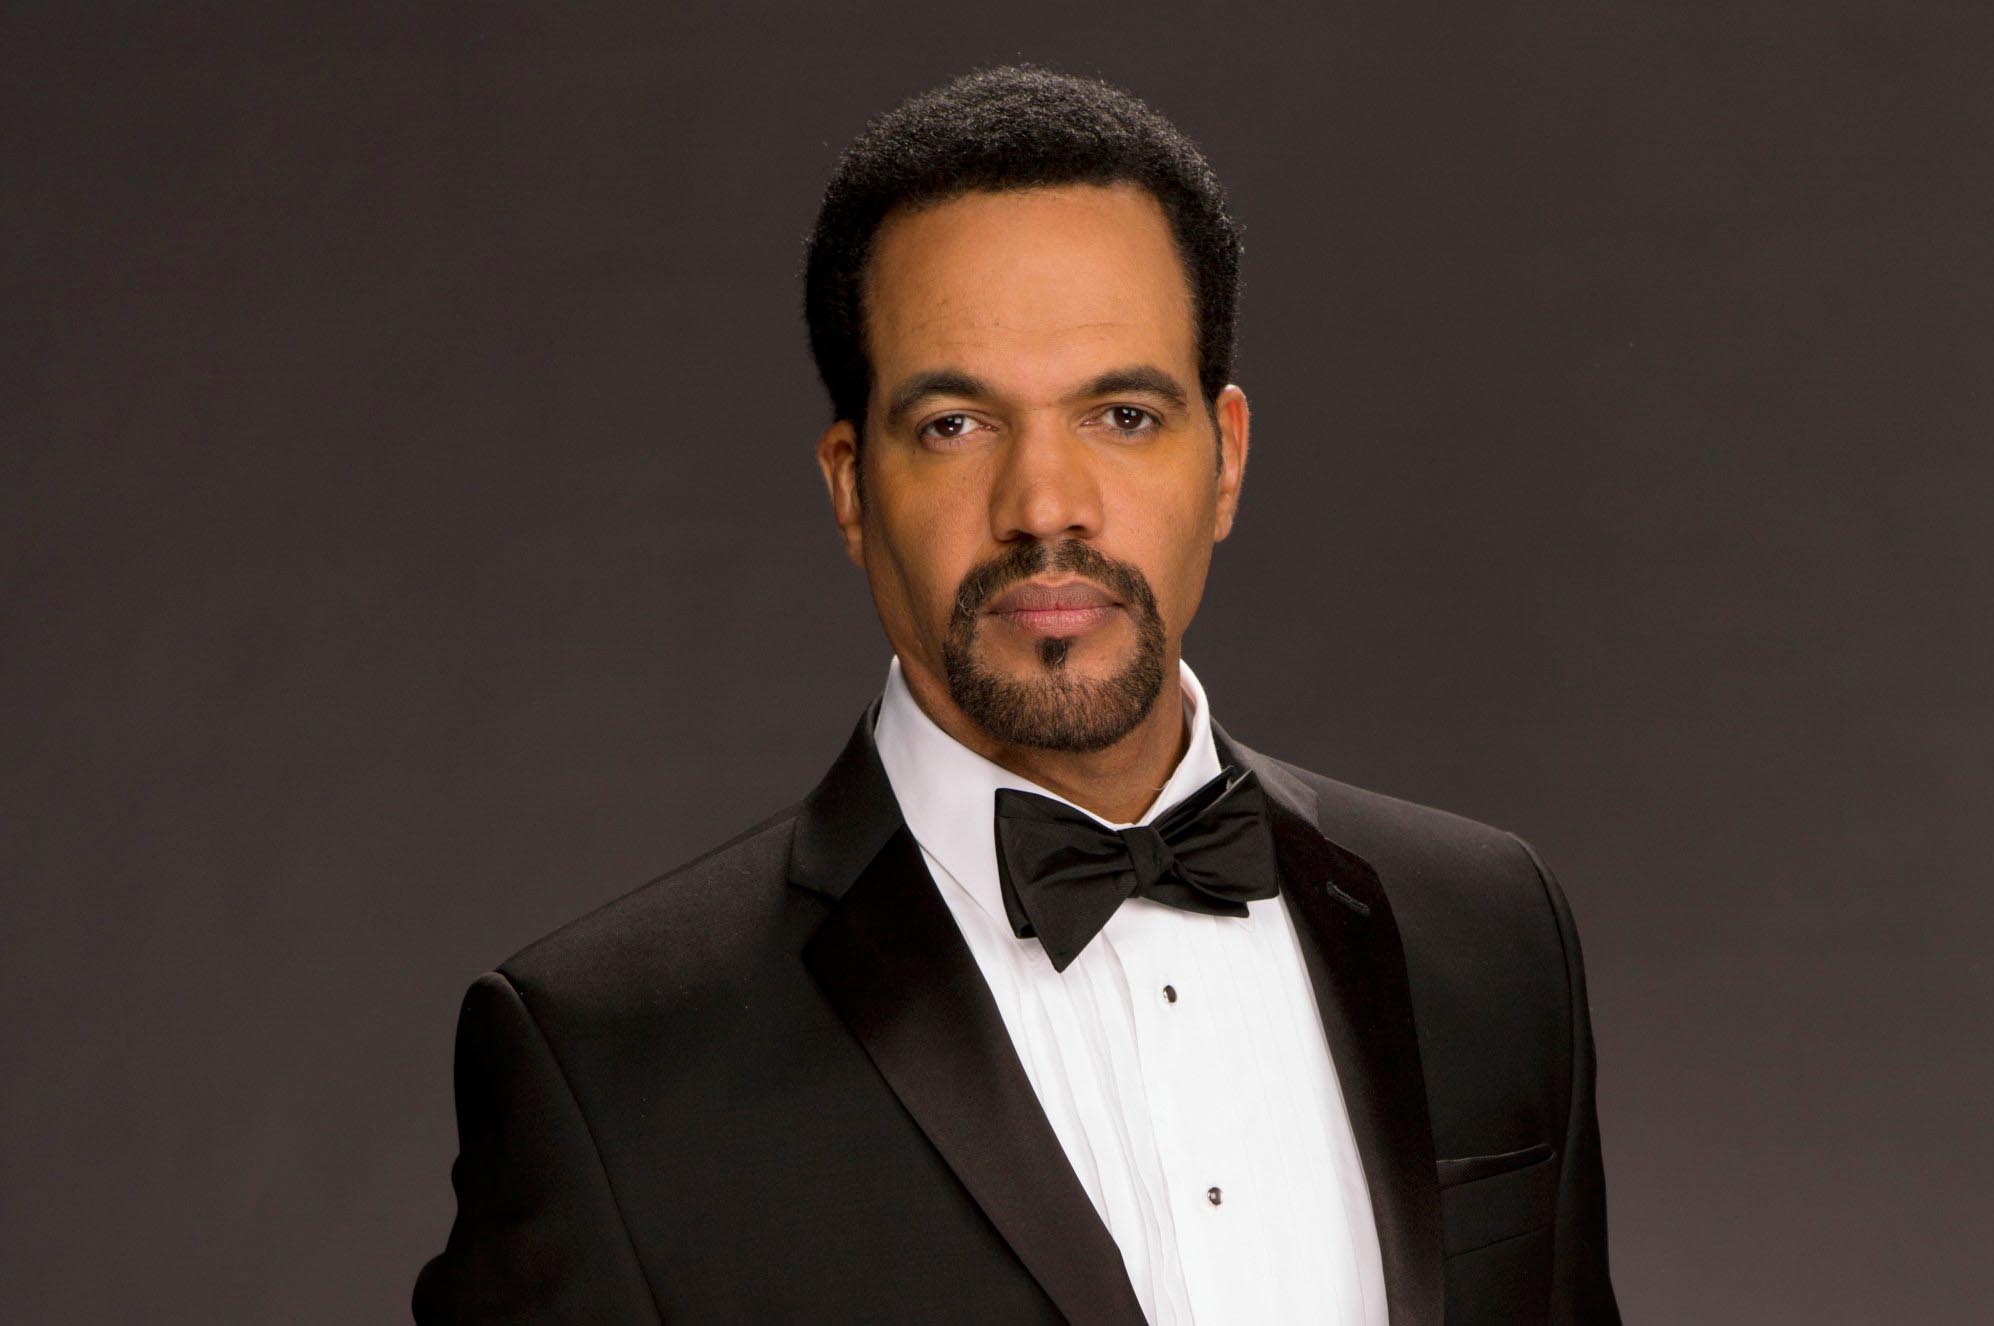 'Young and the Restless' star Kristoff St. John dead at 52